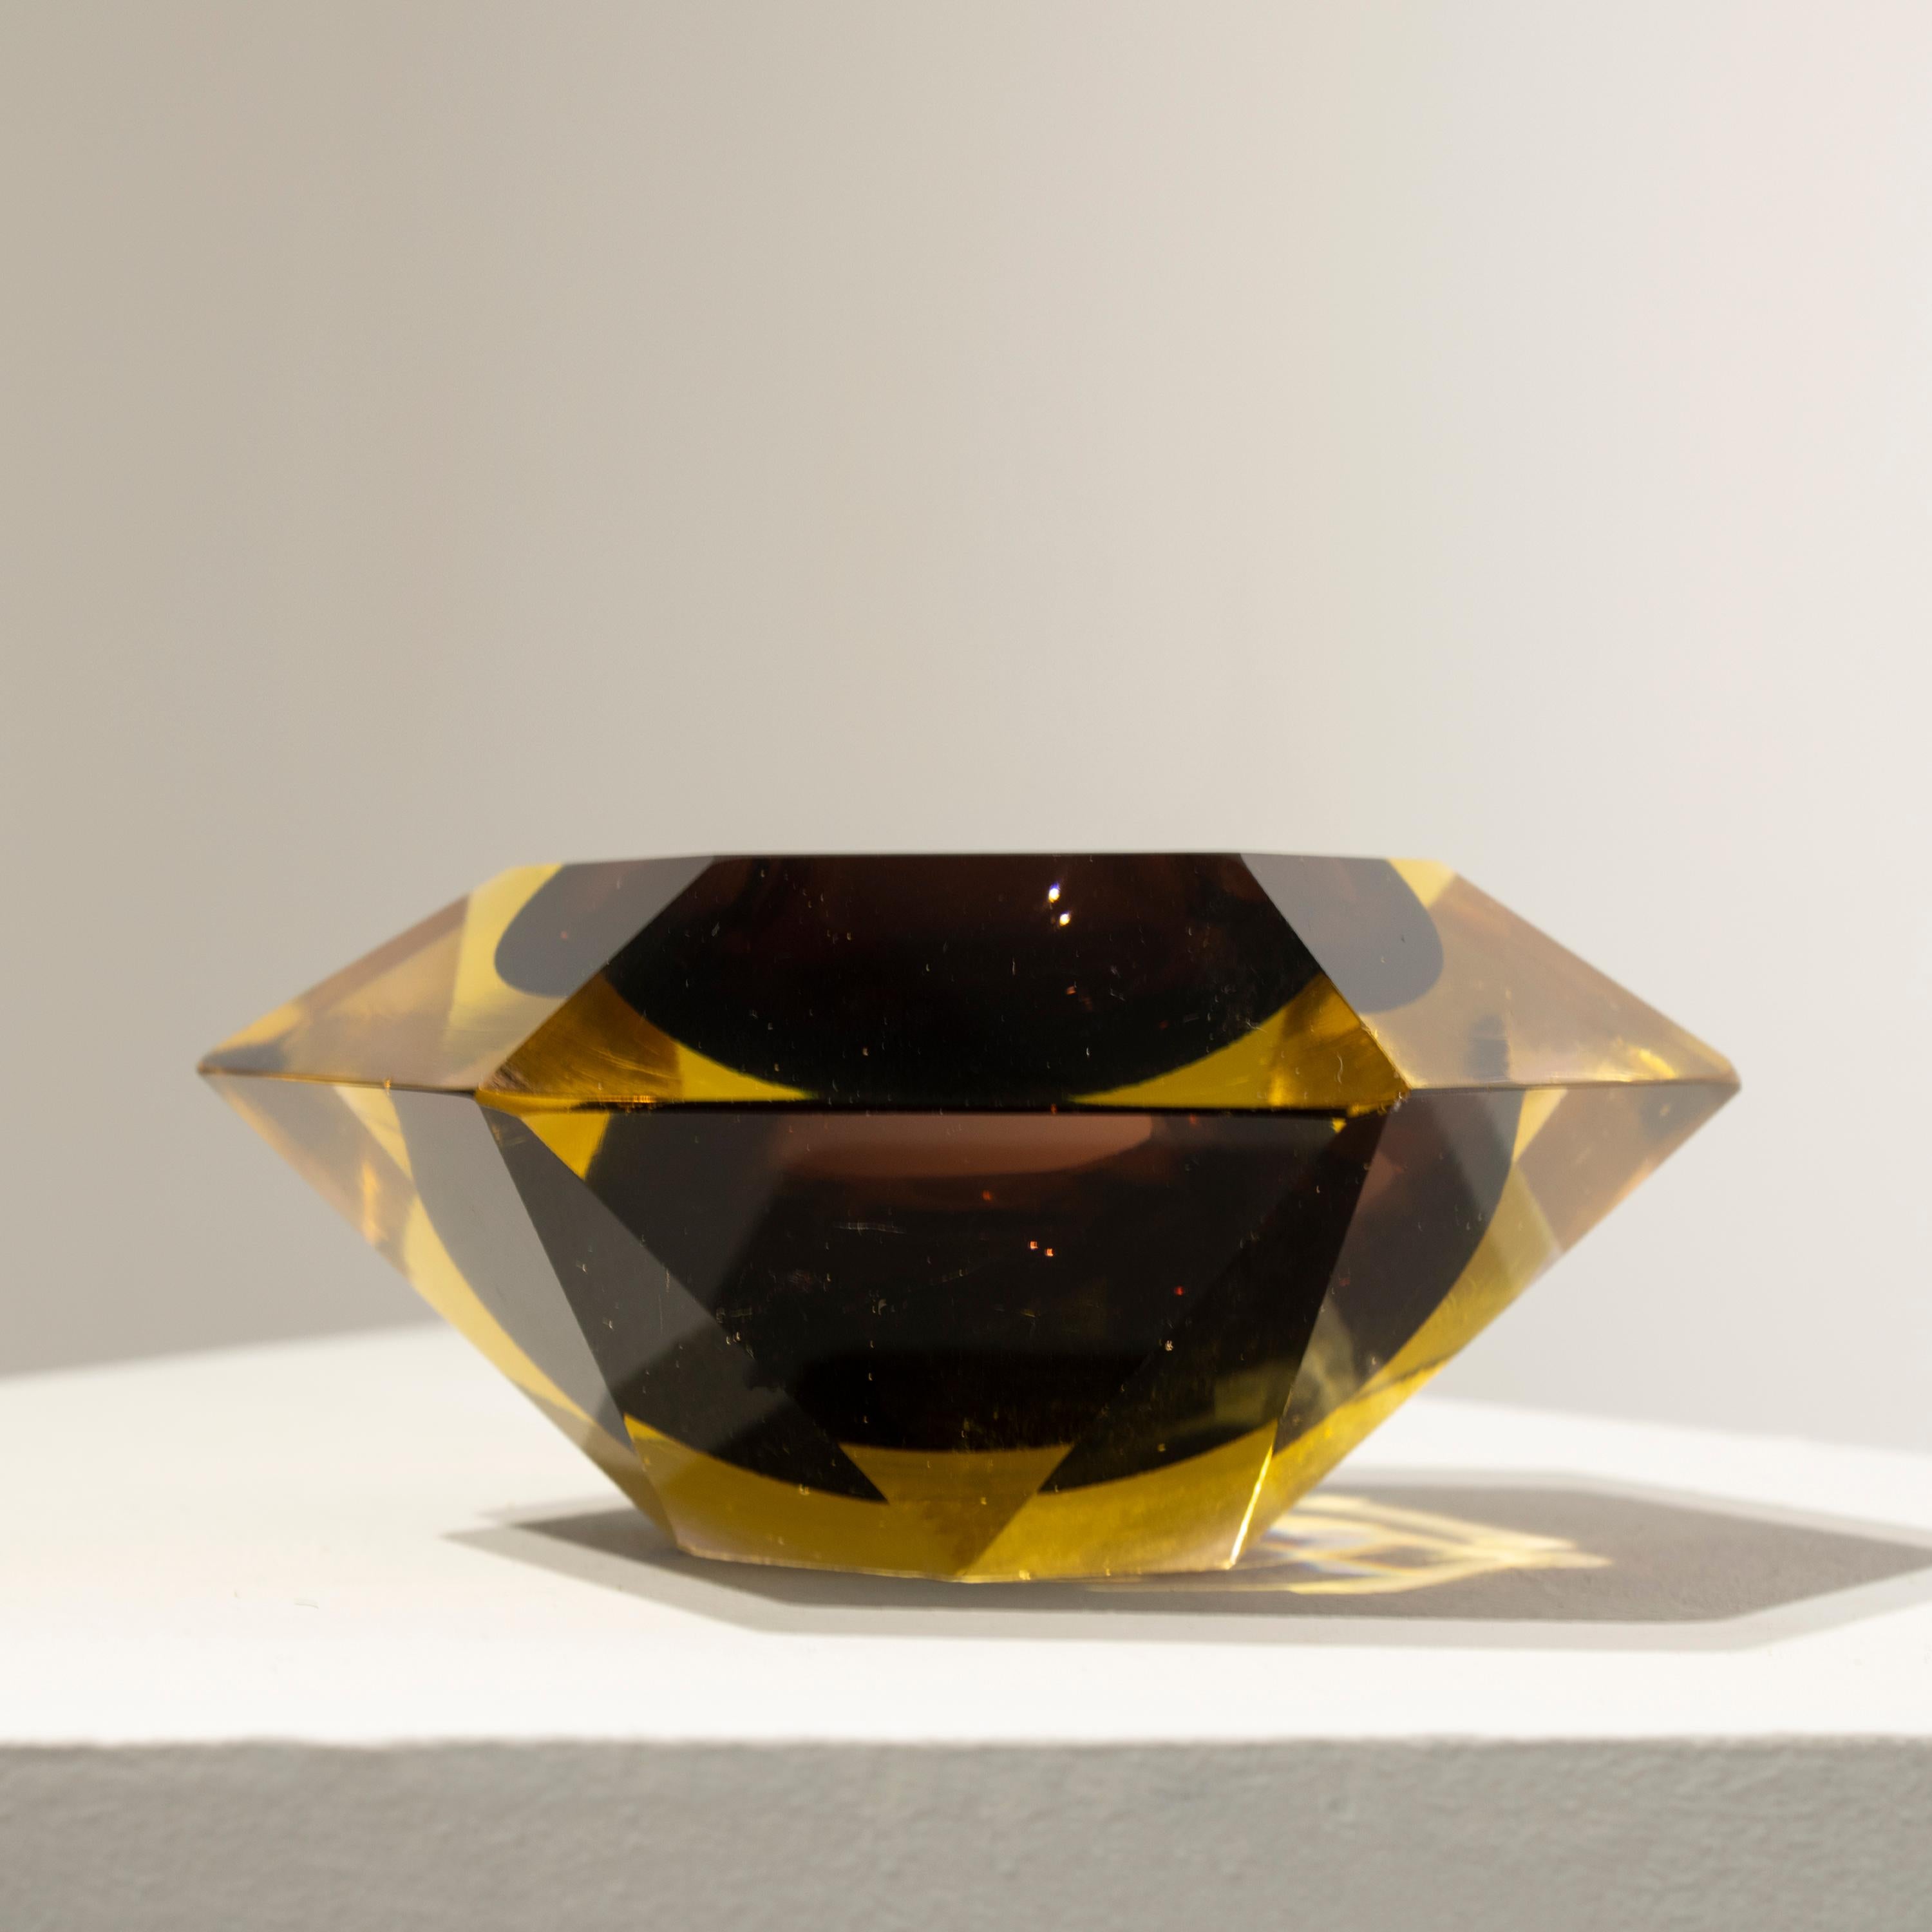 Italian small vase designed by Flavio Poli in the 1970´s. The vase is hand-crafted in faceted Murano glass with a polygonal shape, in different colors with predominant brown.